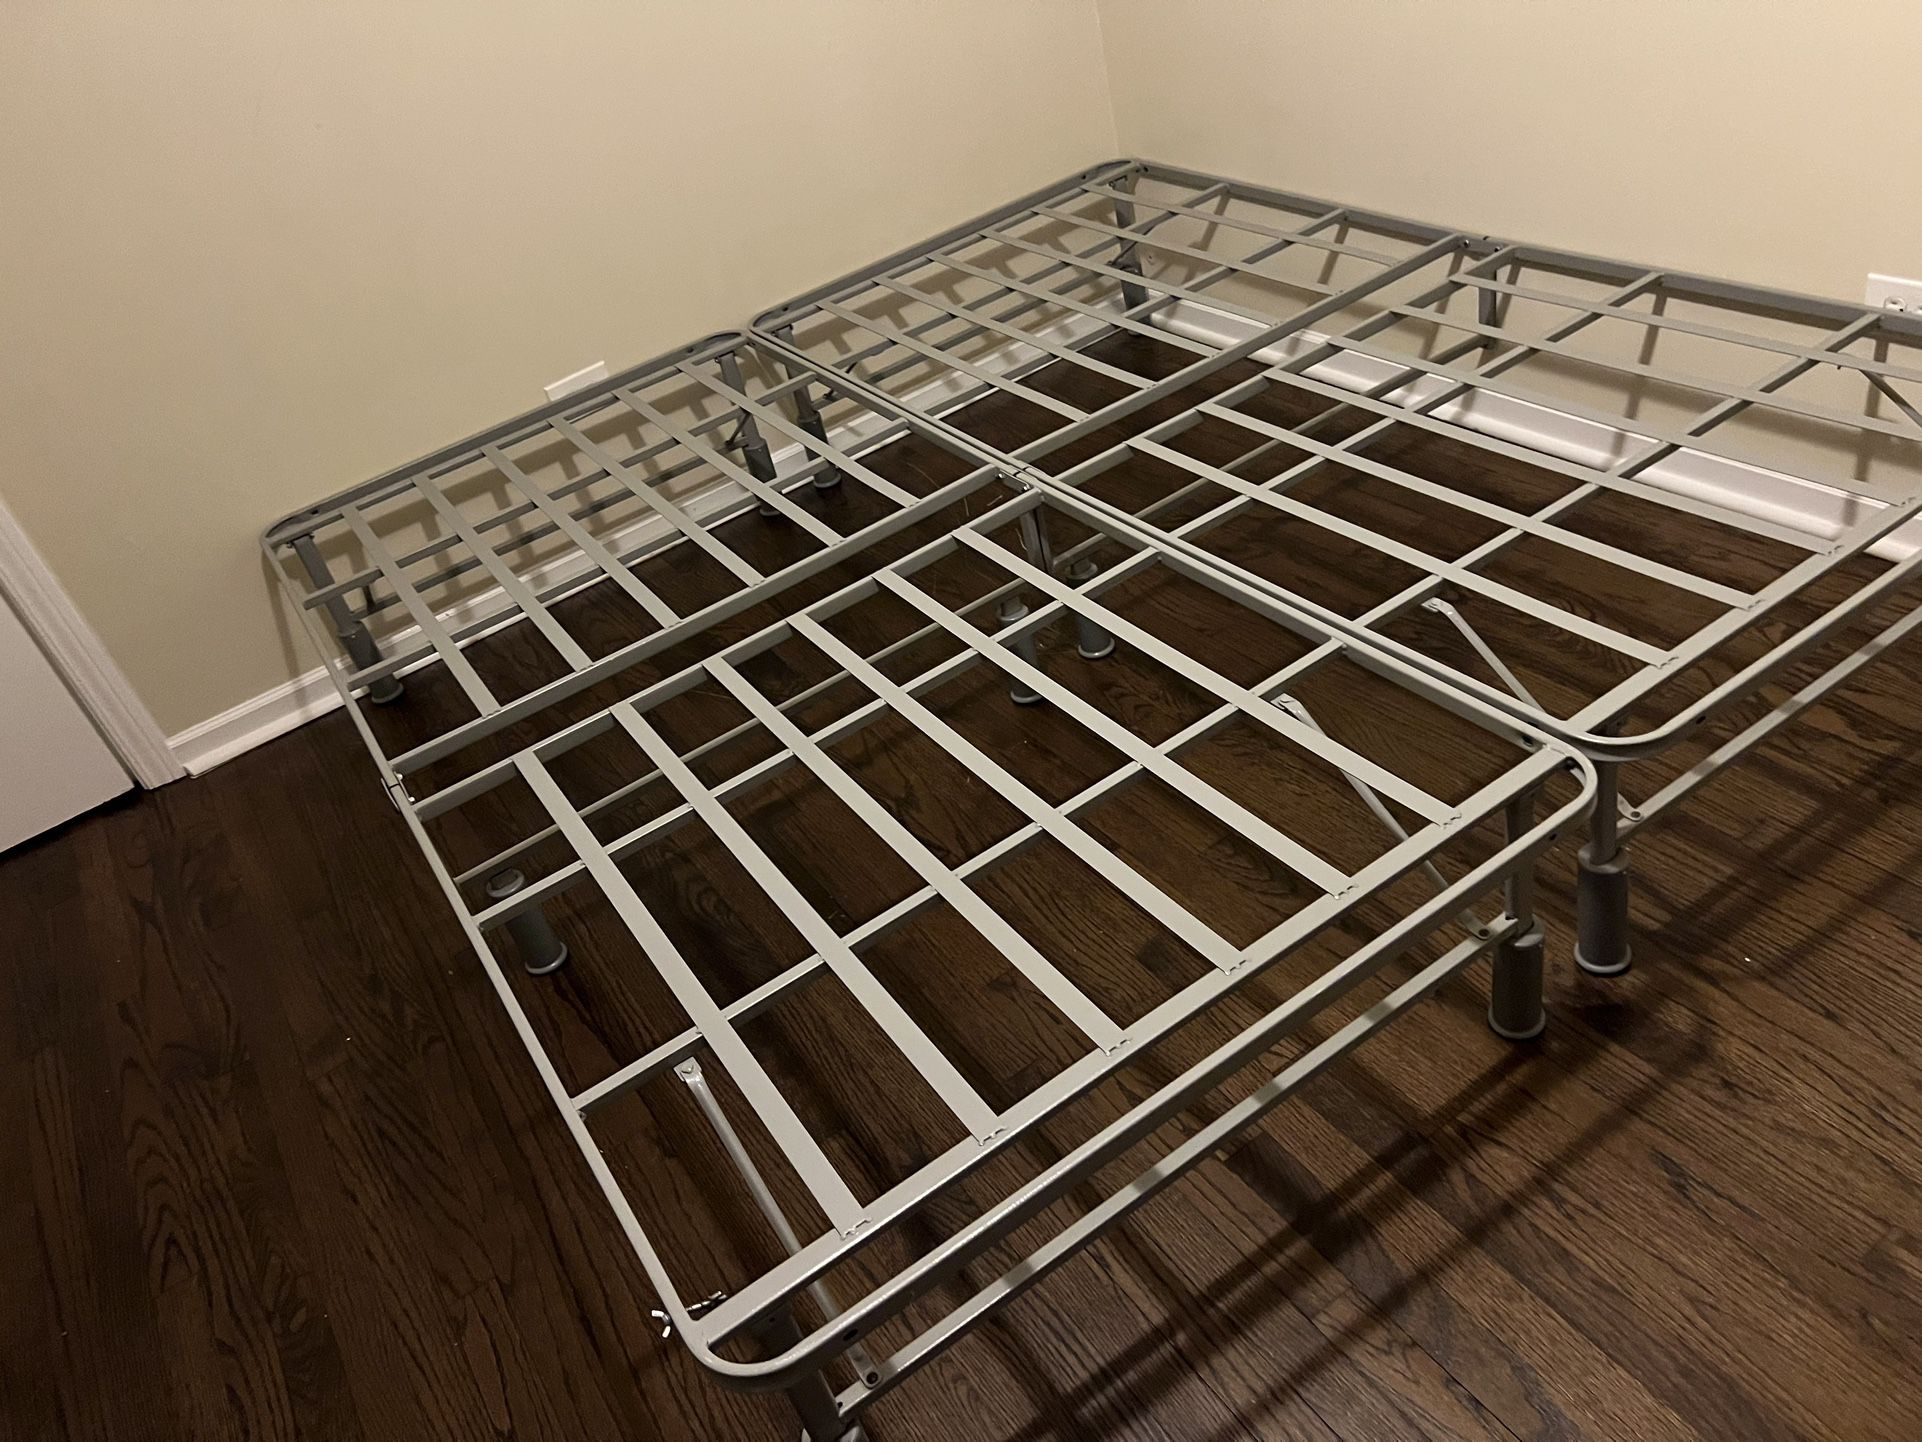 King Bed Frame Gently Used 